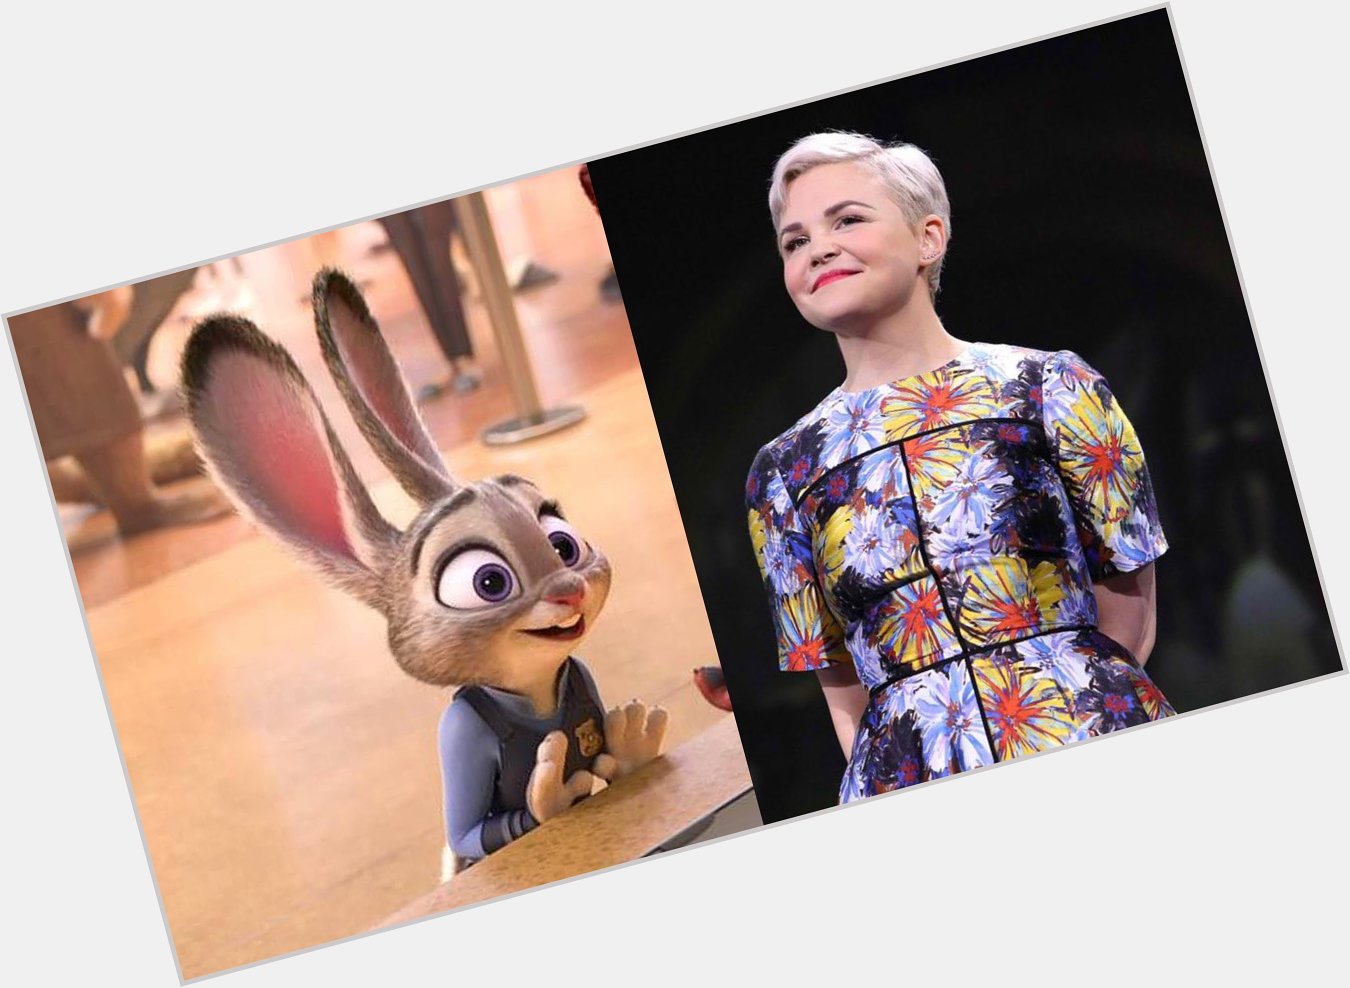 Happy 39th Birthday to Ginnifer Goodwin! The voice of Judy Hopps in Zootopia.   